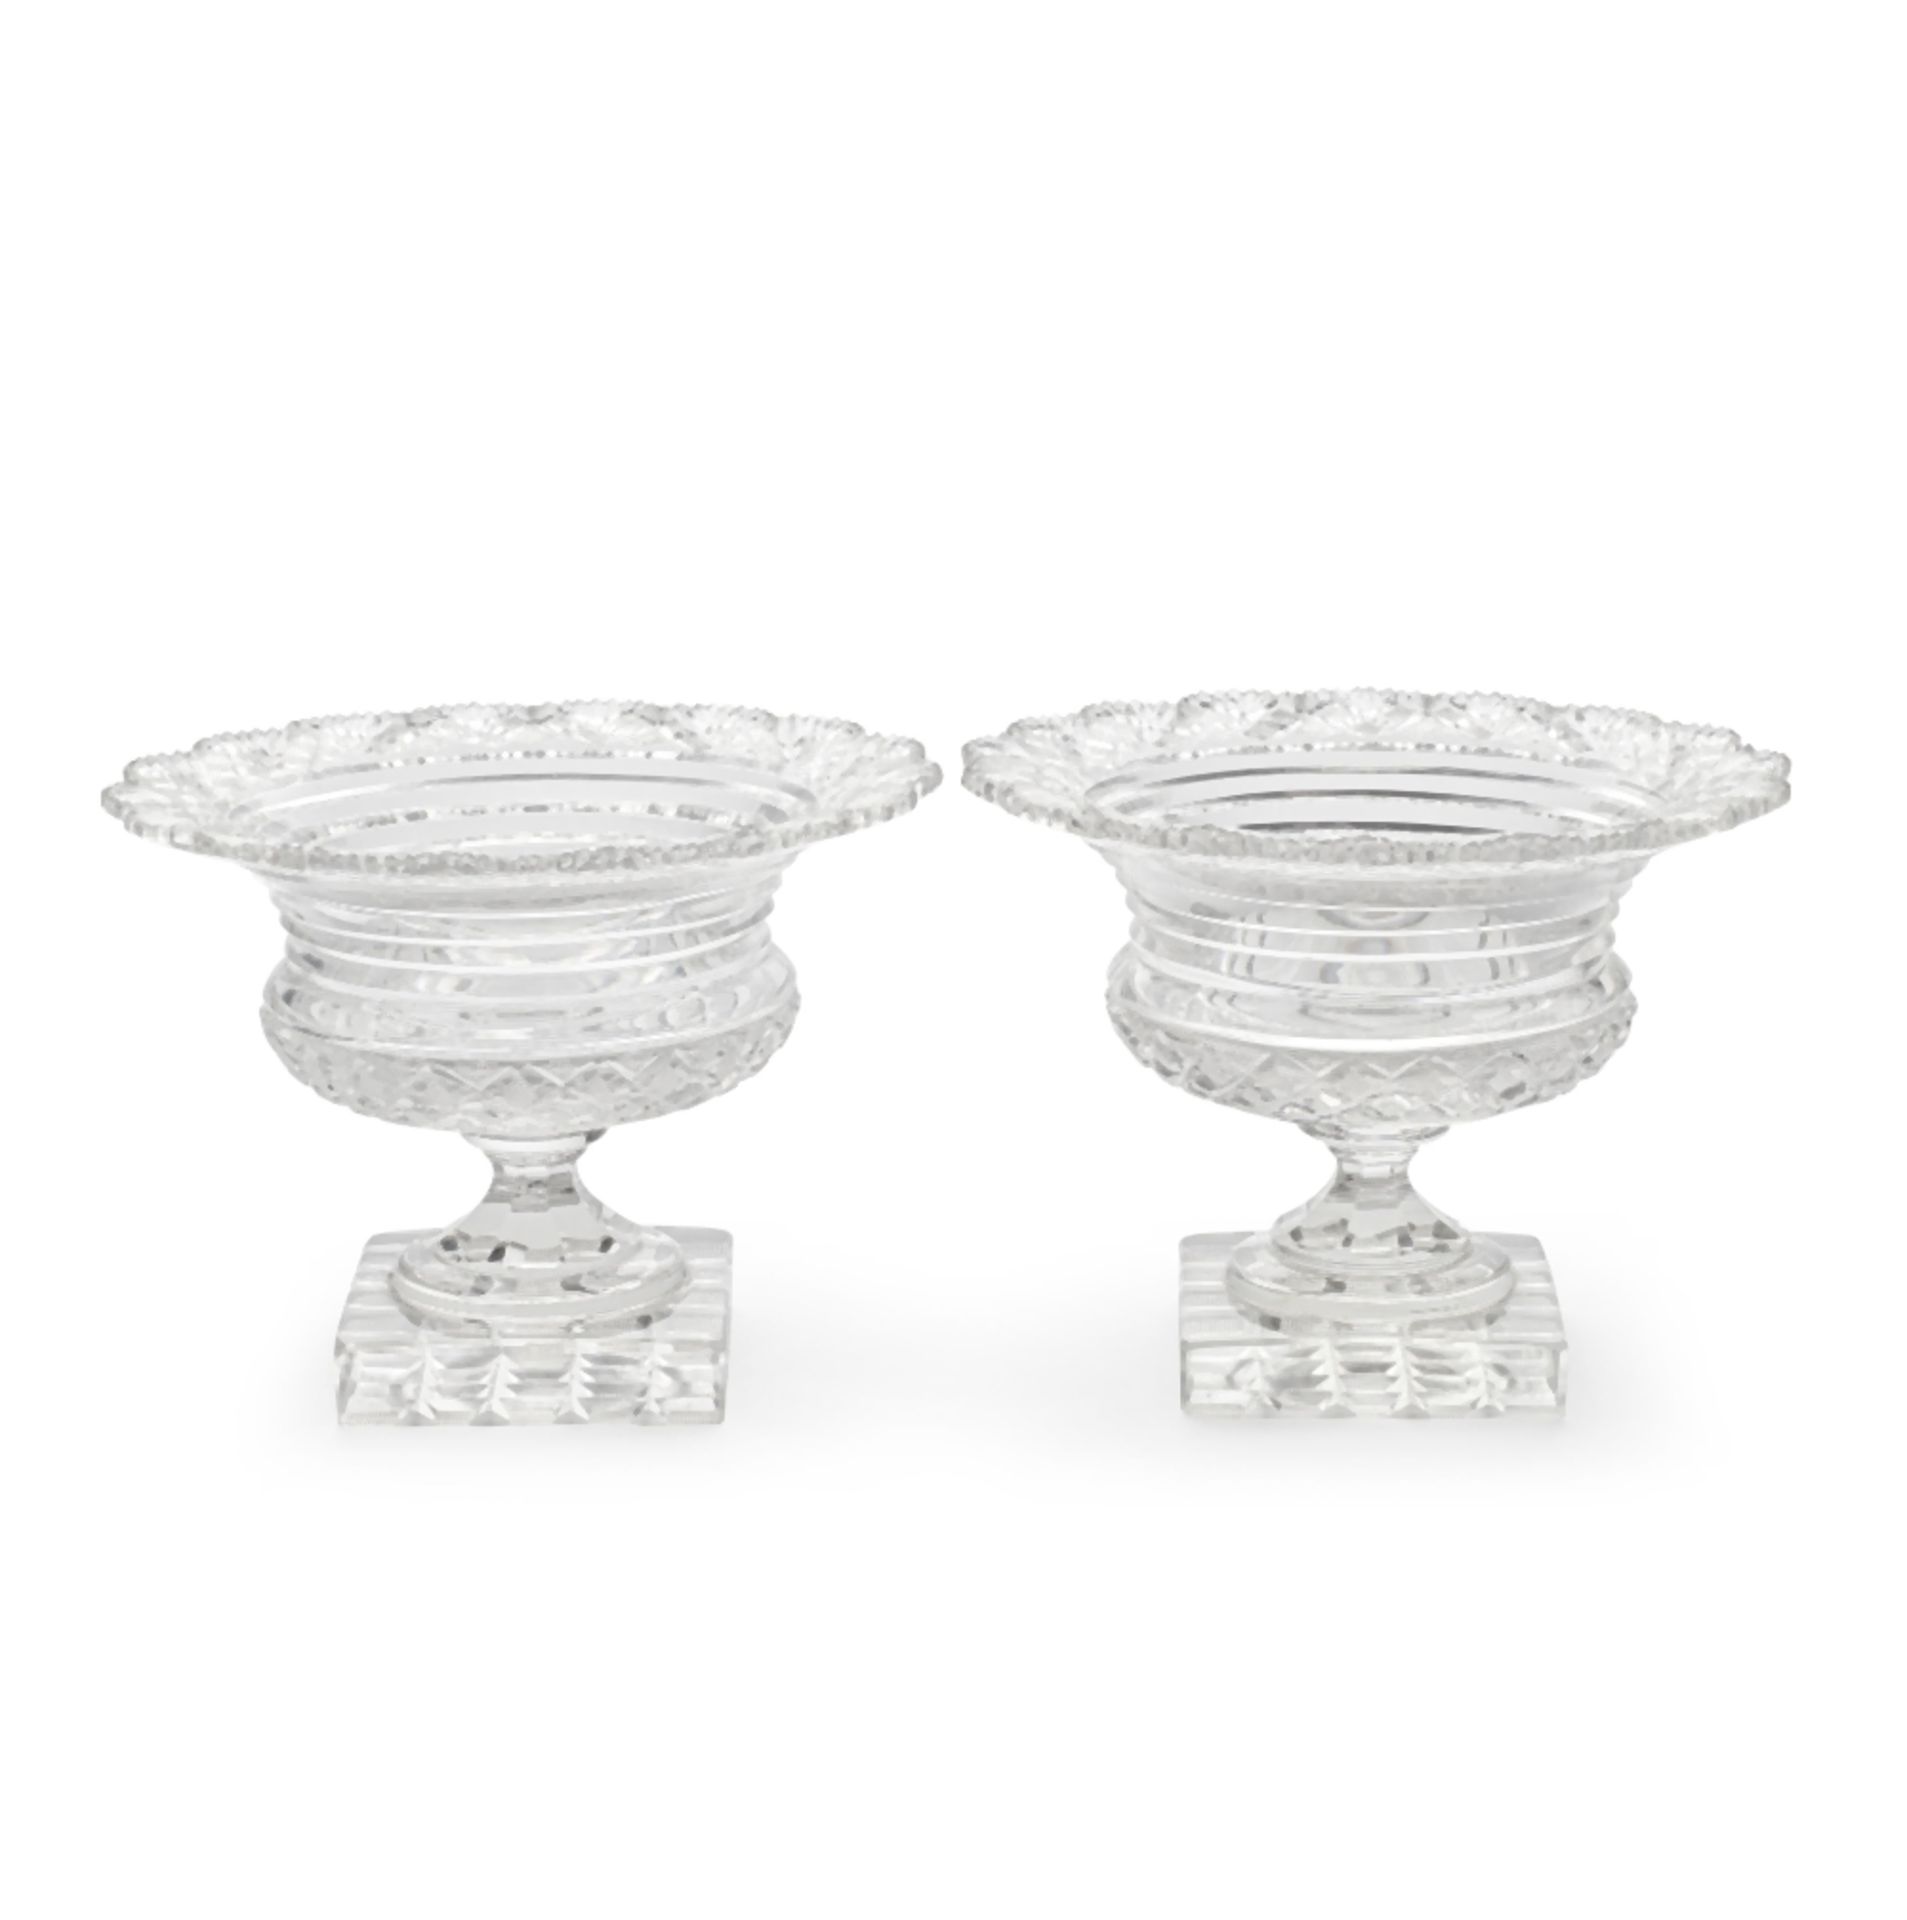 A fine pair of cut glass pedestal bowls, probably Irish, early 19th century